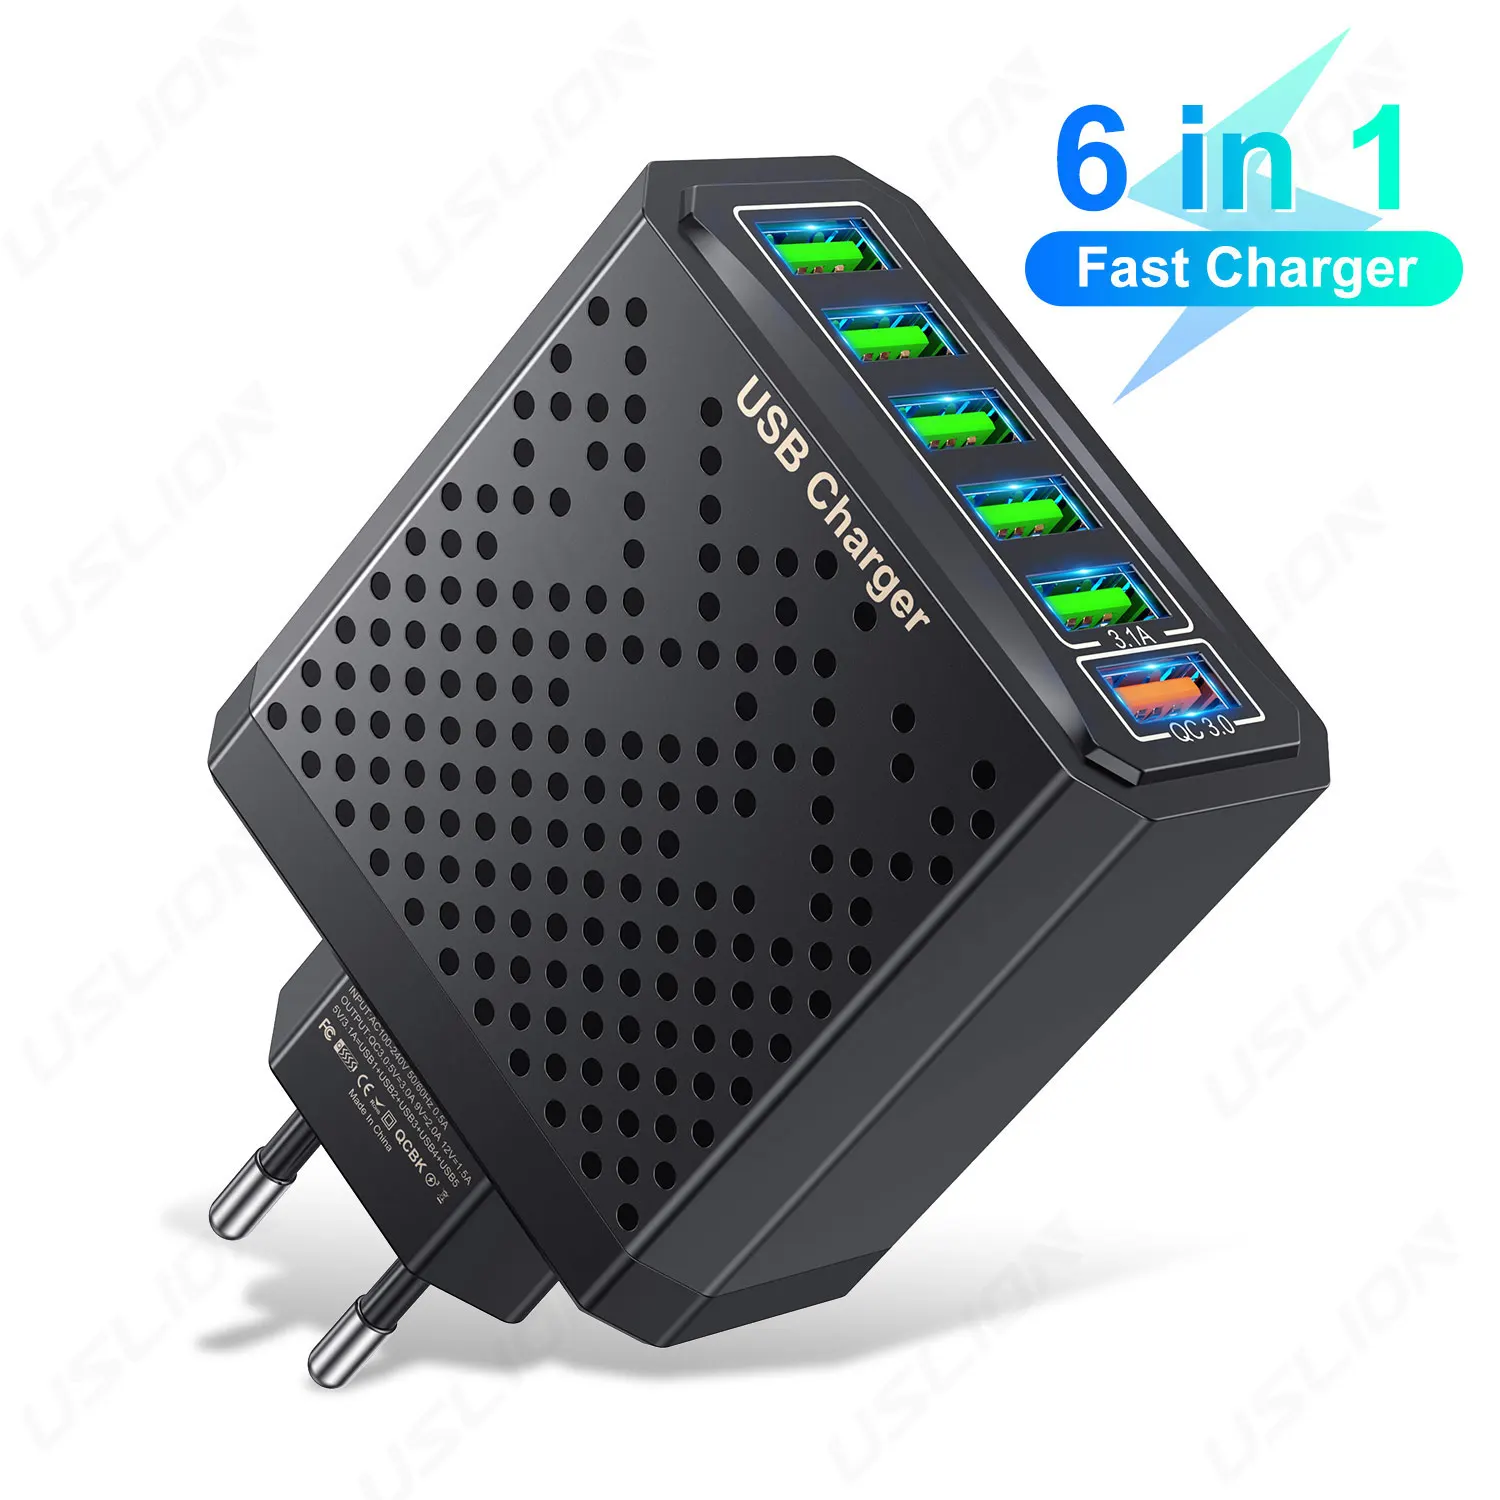 

6 Ports USB Charger Mobile Phone Fast Charging QC 3.0 Adapter For iPhone 14 13 Pro Max Samsung S23 Xiaomi Mi 12 POCO VIVO OPPO